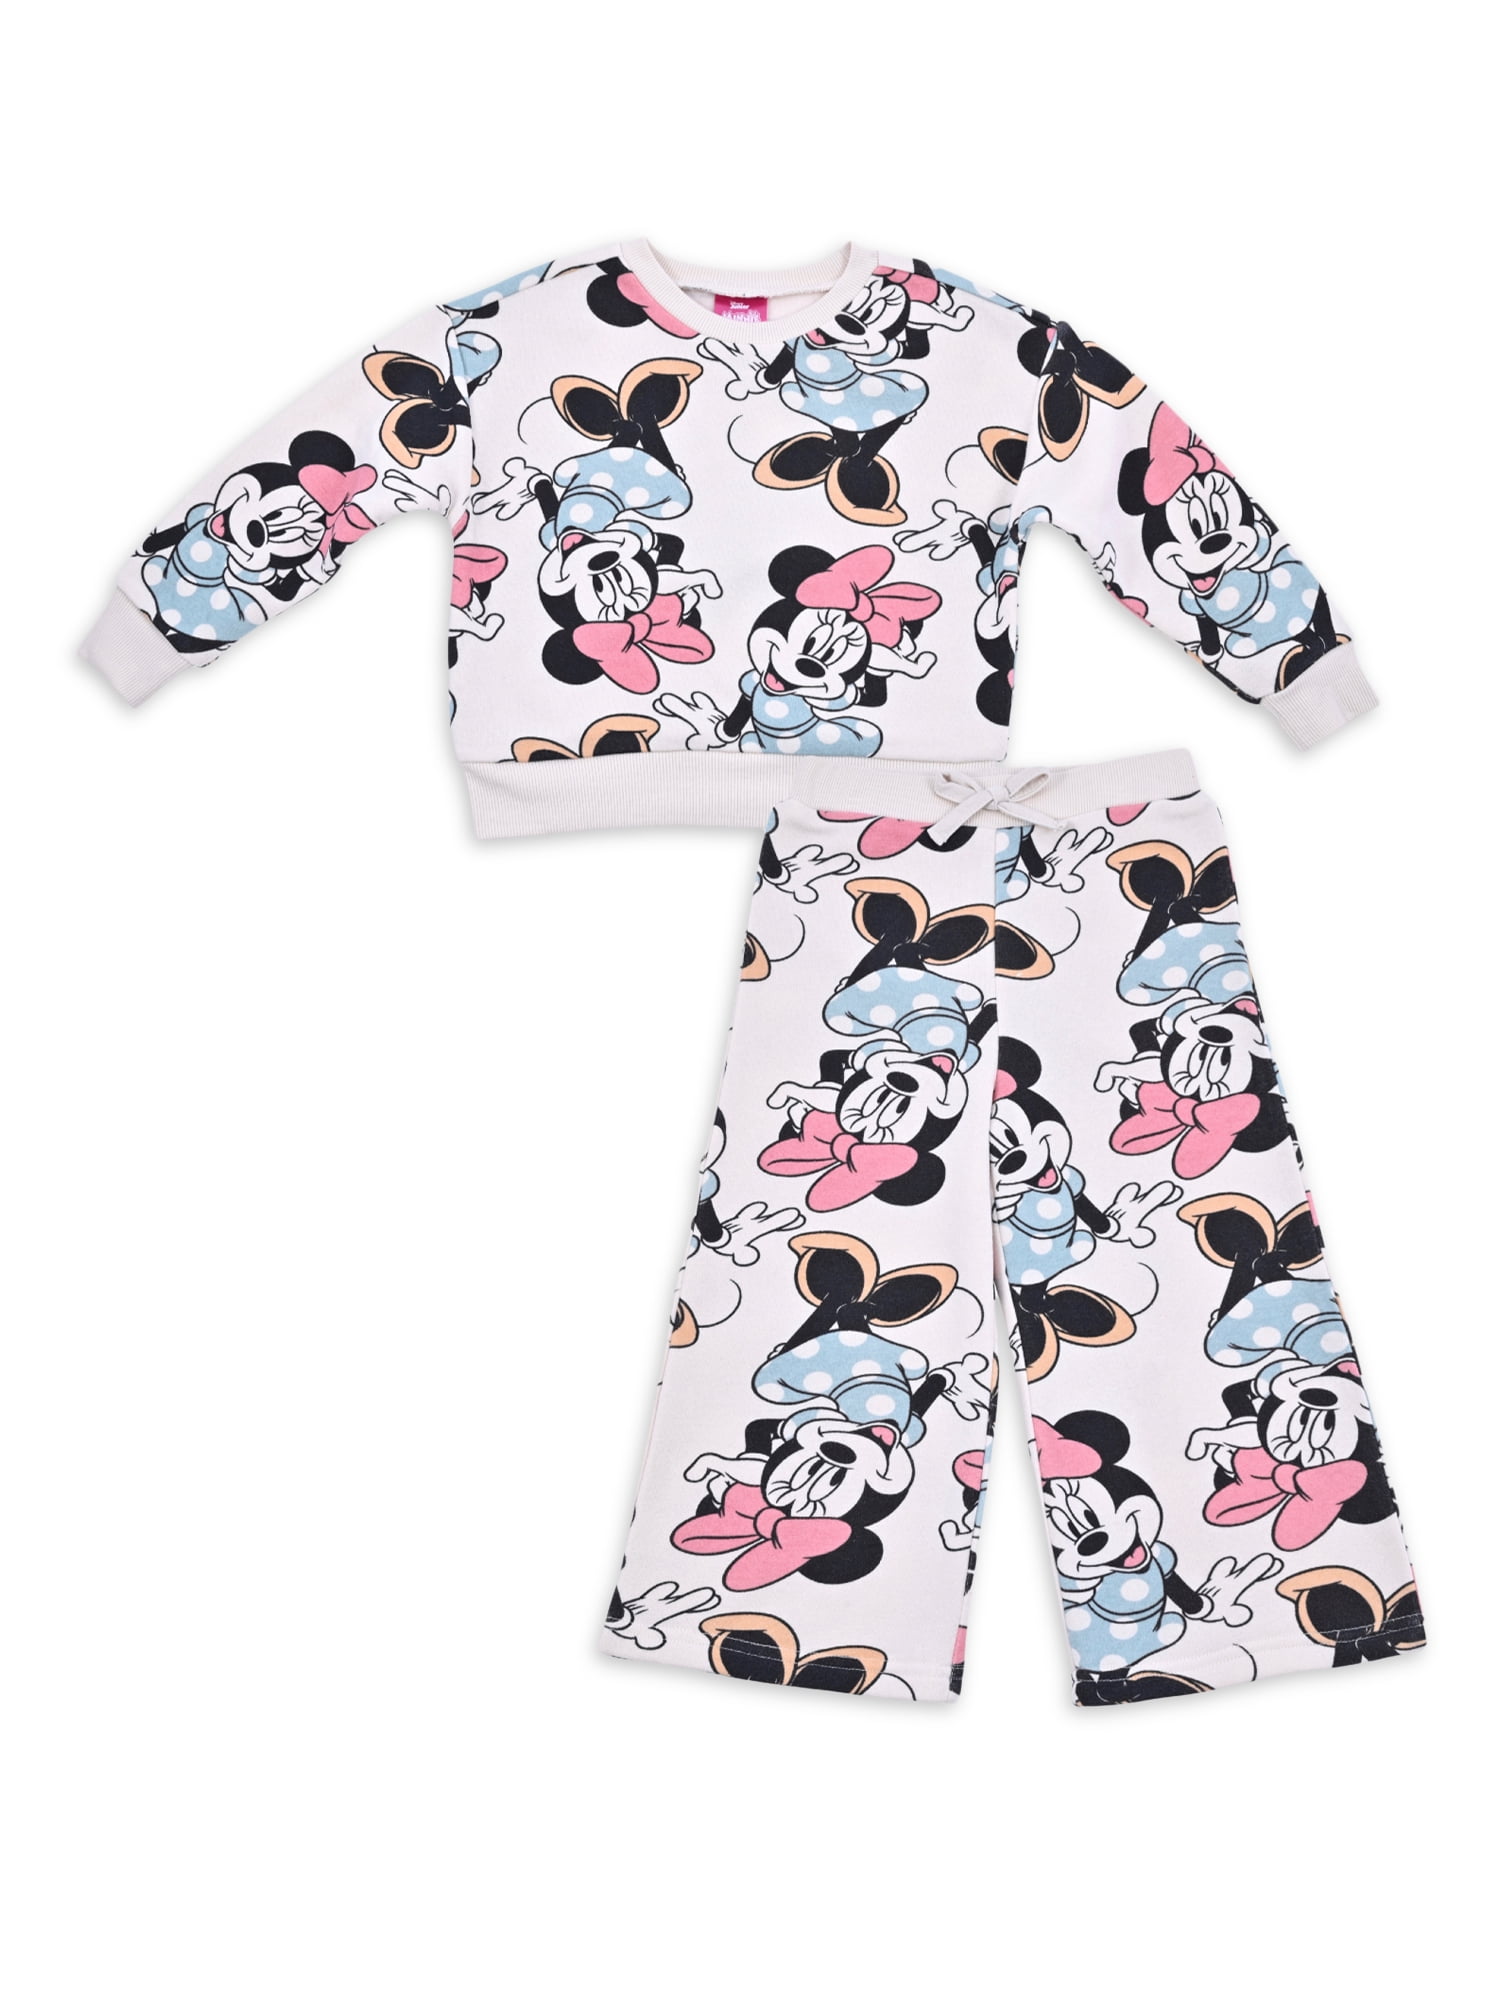 Minnie Mouse Baby and Toddler Girl Wide Leg Pant and Crew Neck Sweatshirt, 2 Piece Outfit Set, 12 Months-5T